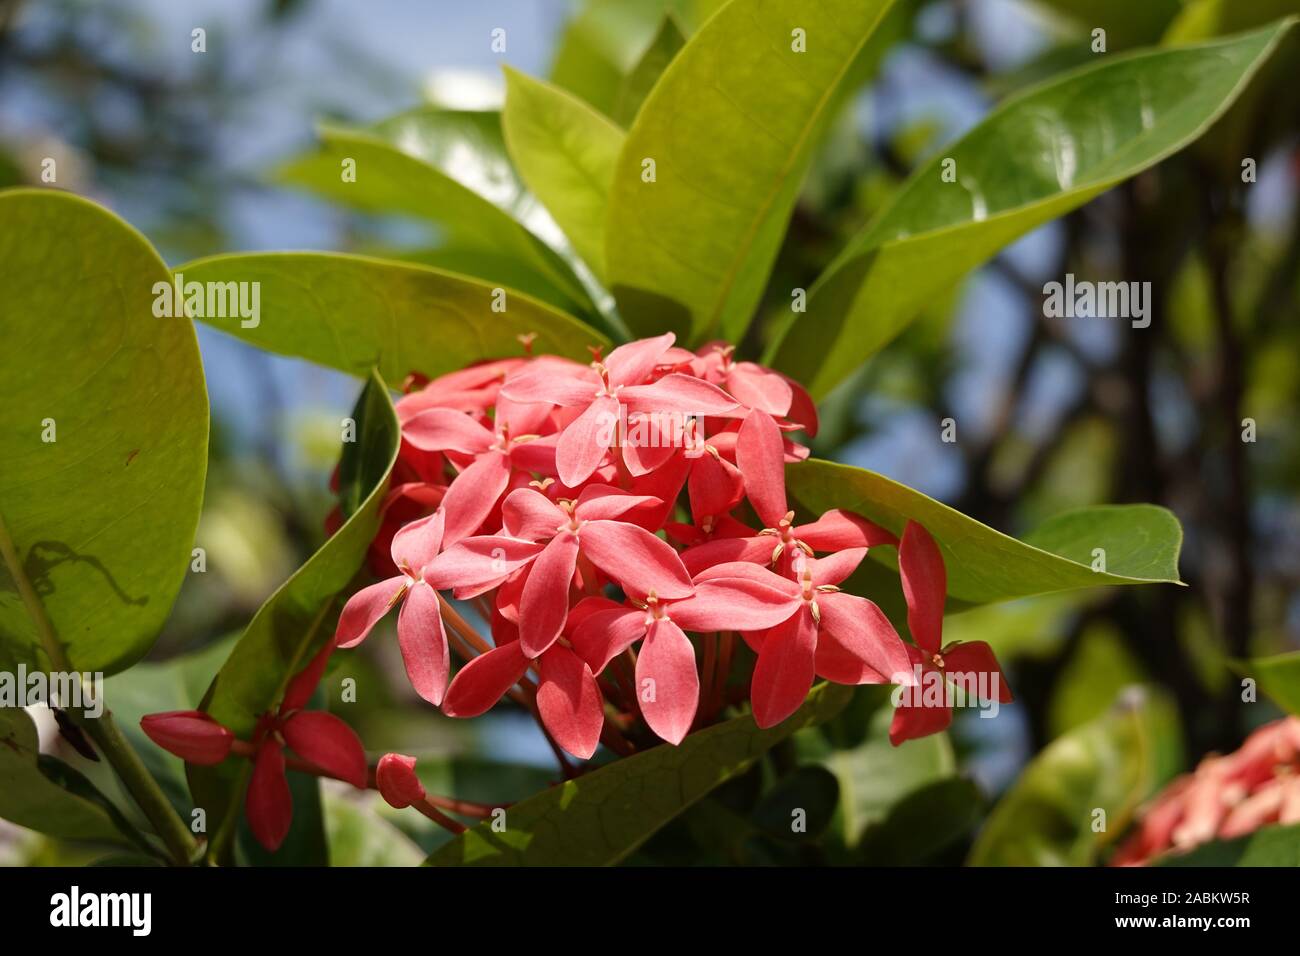 Red flowers of ixora coccinea, flame of the woods, jungle geranium, blue sky, blurred background, close up, beautiful tropical Red spike flower Stock Photo